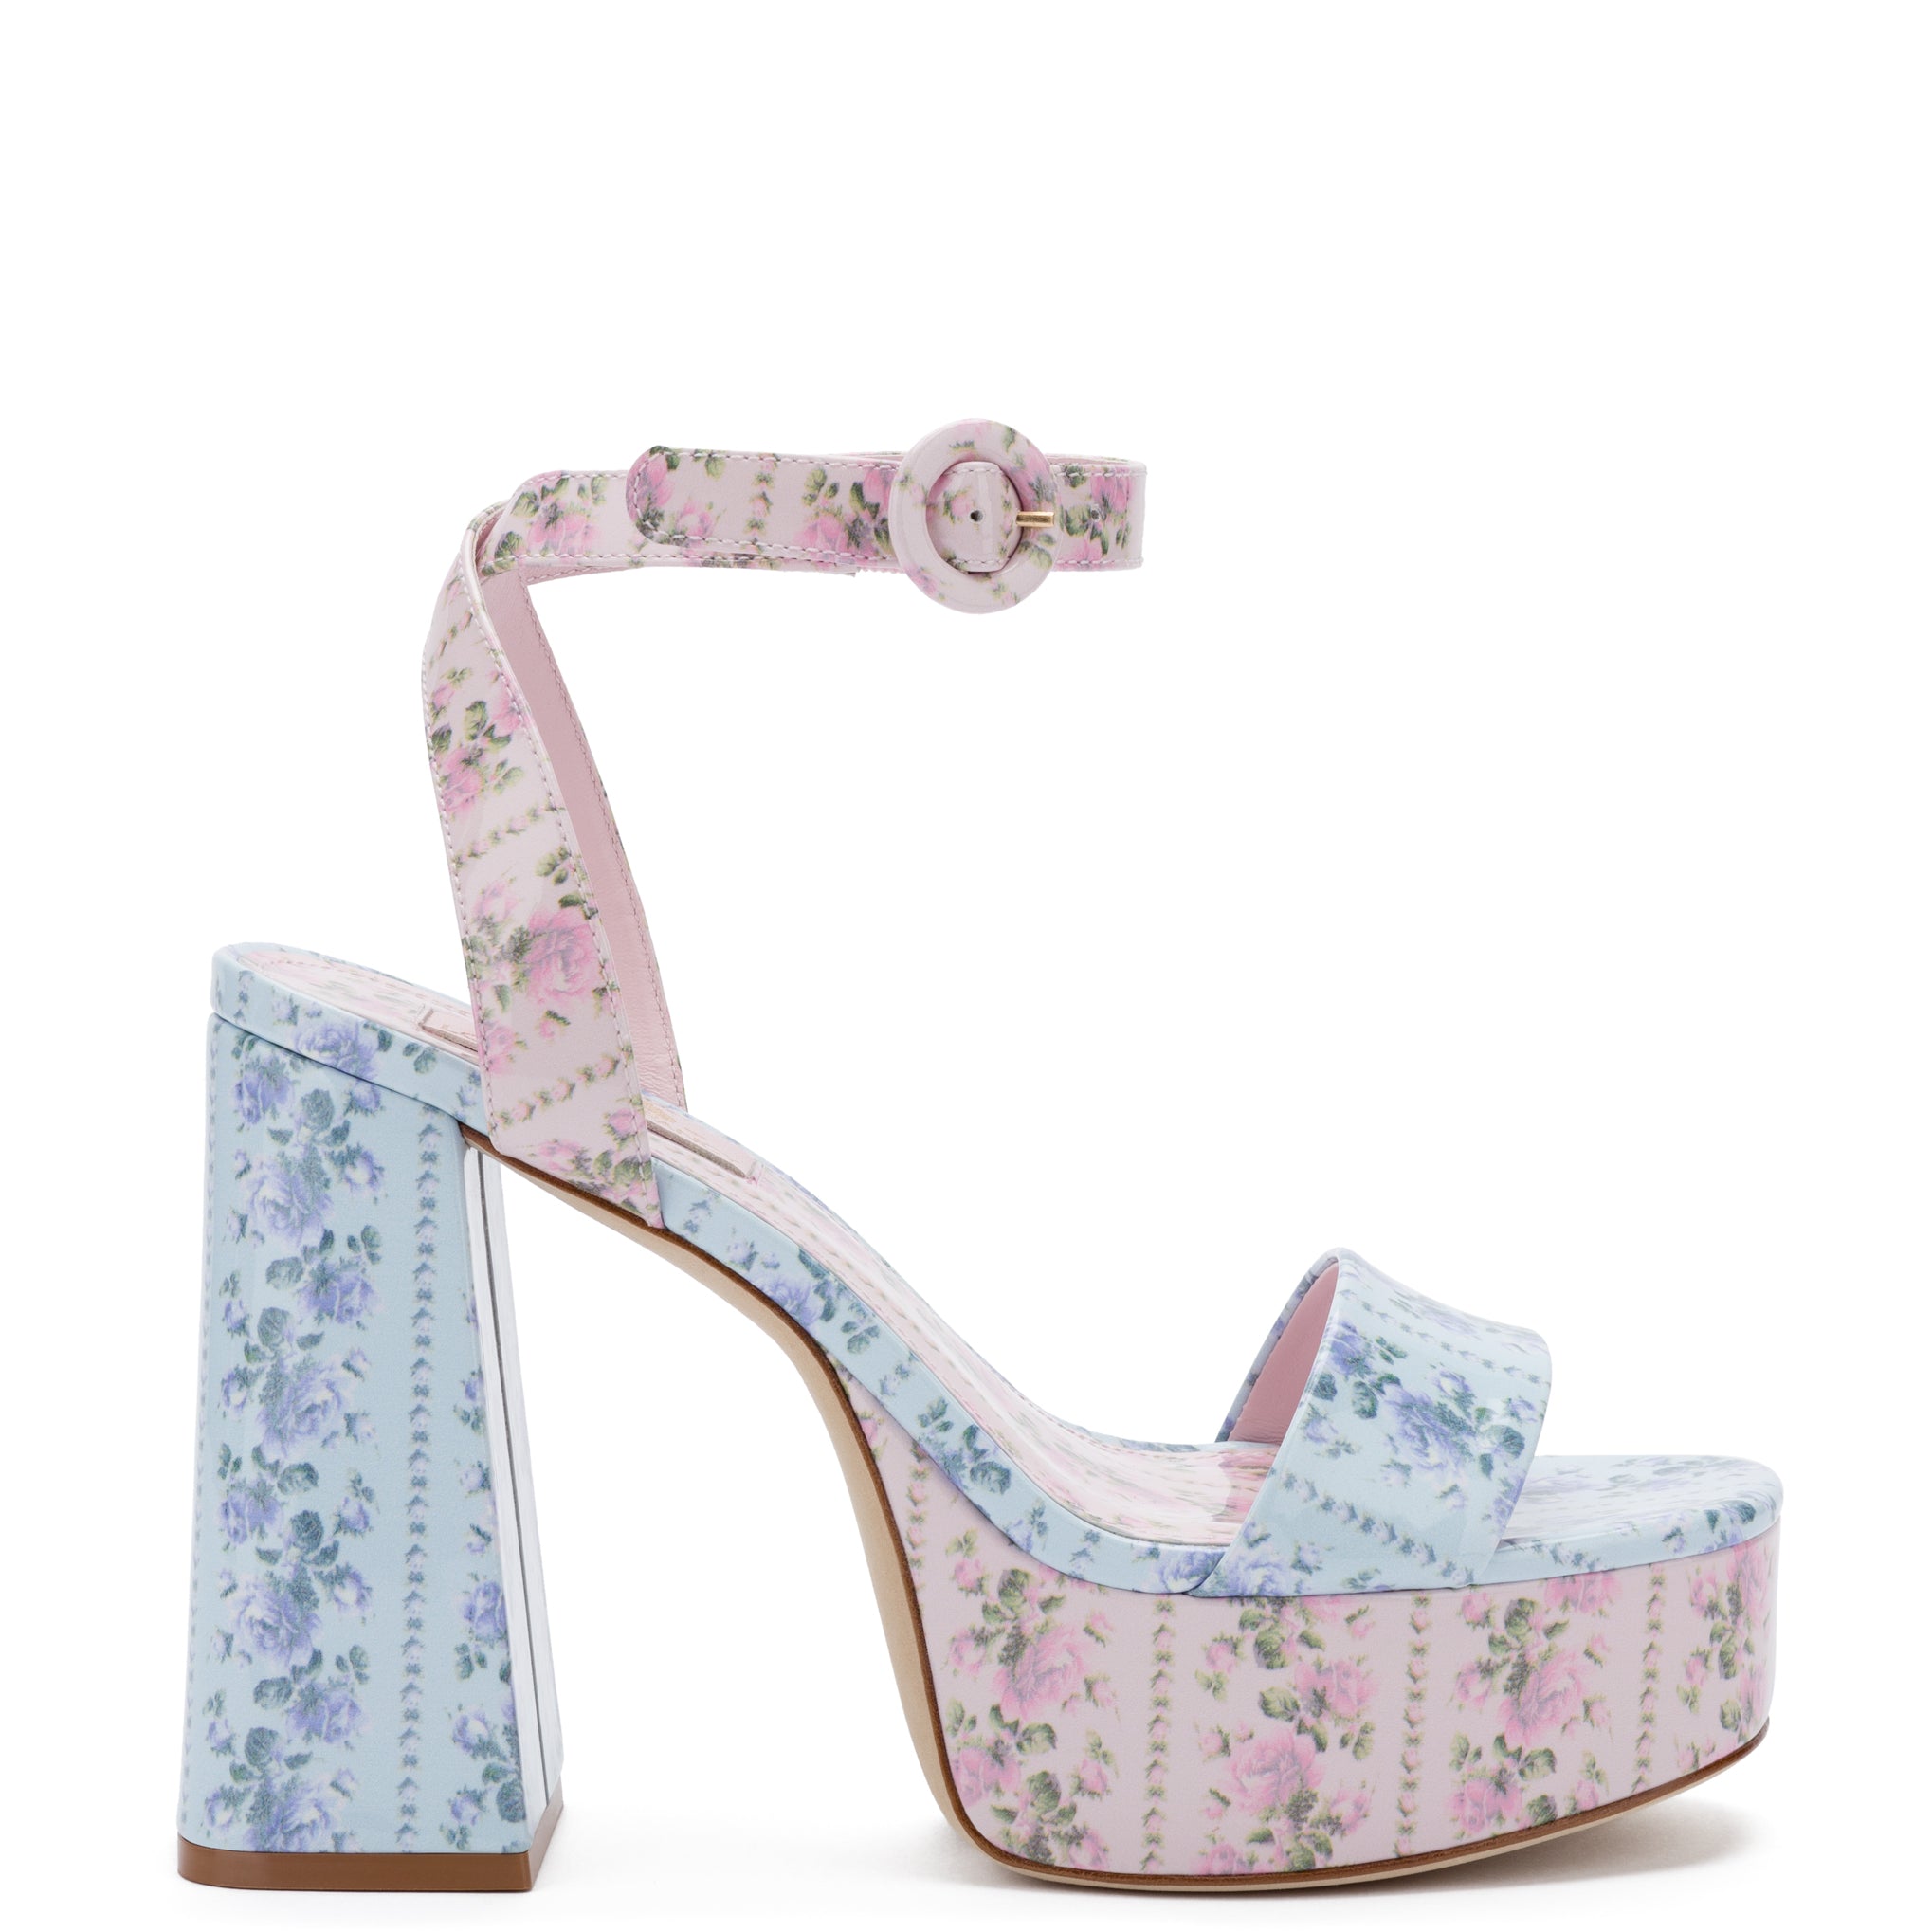 Larroudé for LoveShackFancy: Dolly Sandal In Rose Cerulian Blue and Blushing Pink Patent